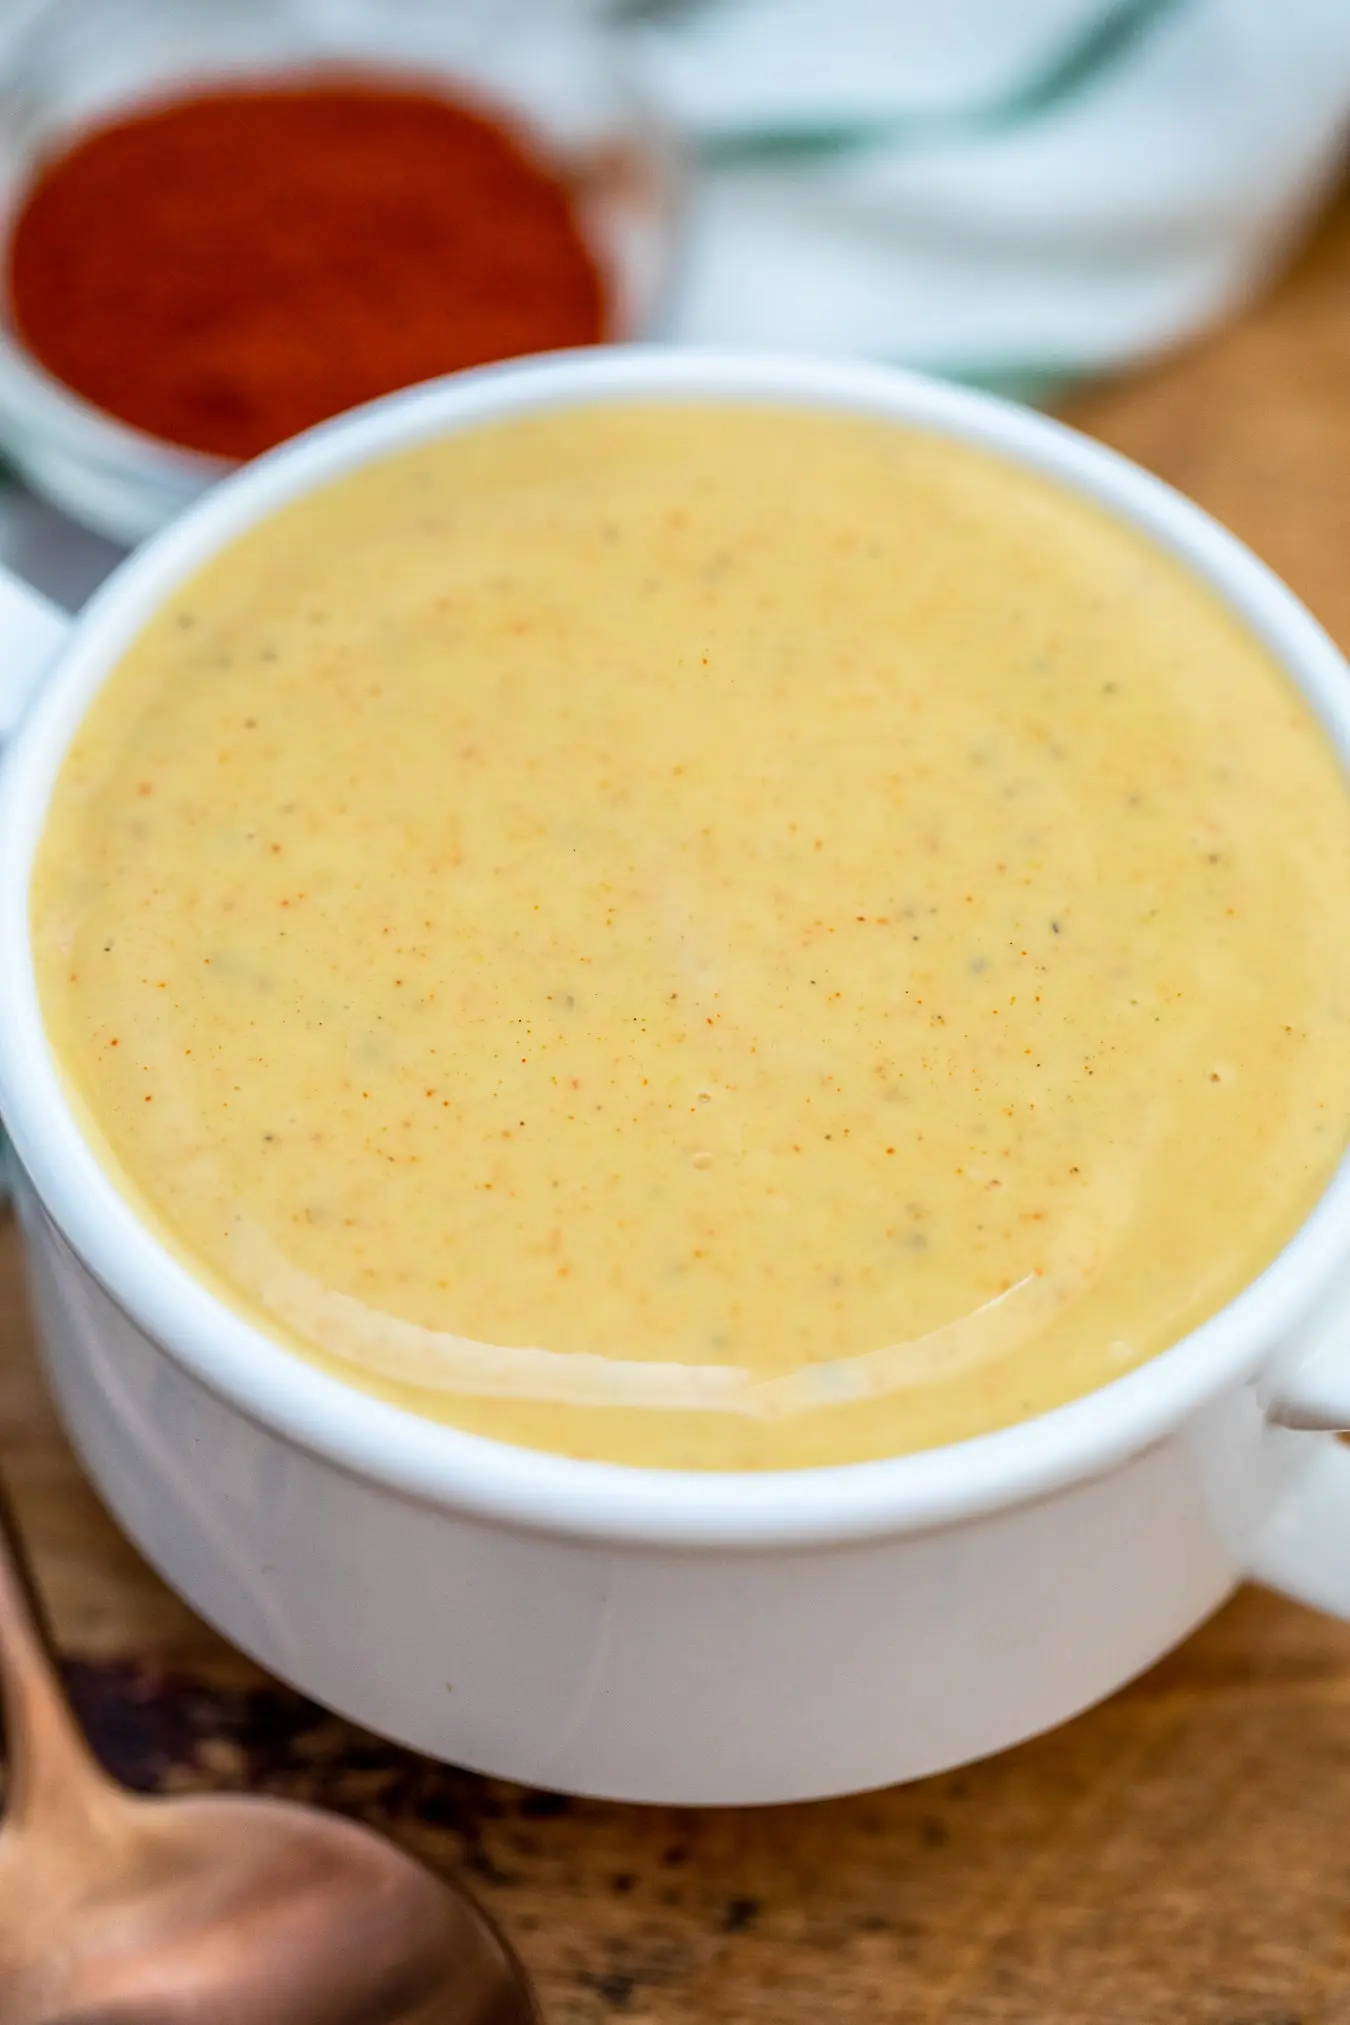 Honey Mustard Sauce. The Best Dip Recipe [Video] - Sweet and Savory Meals